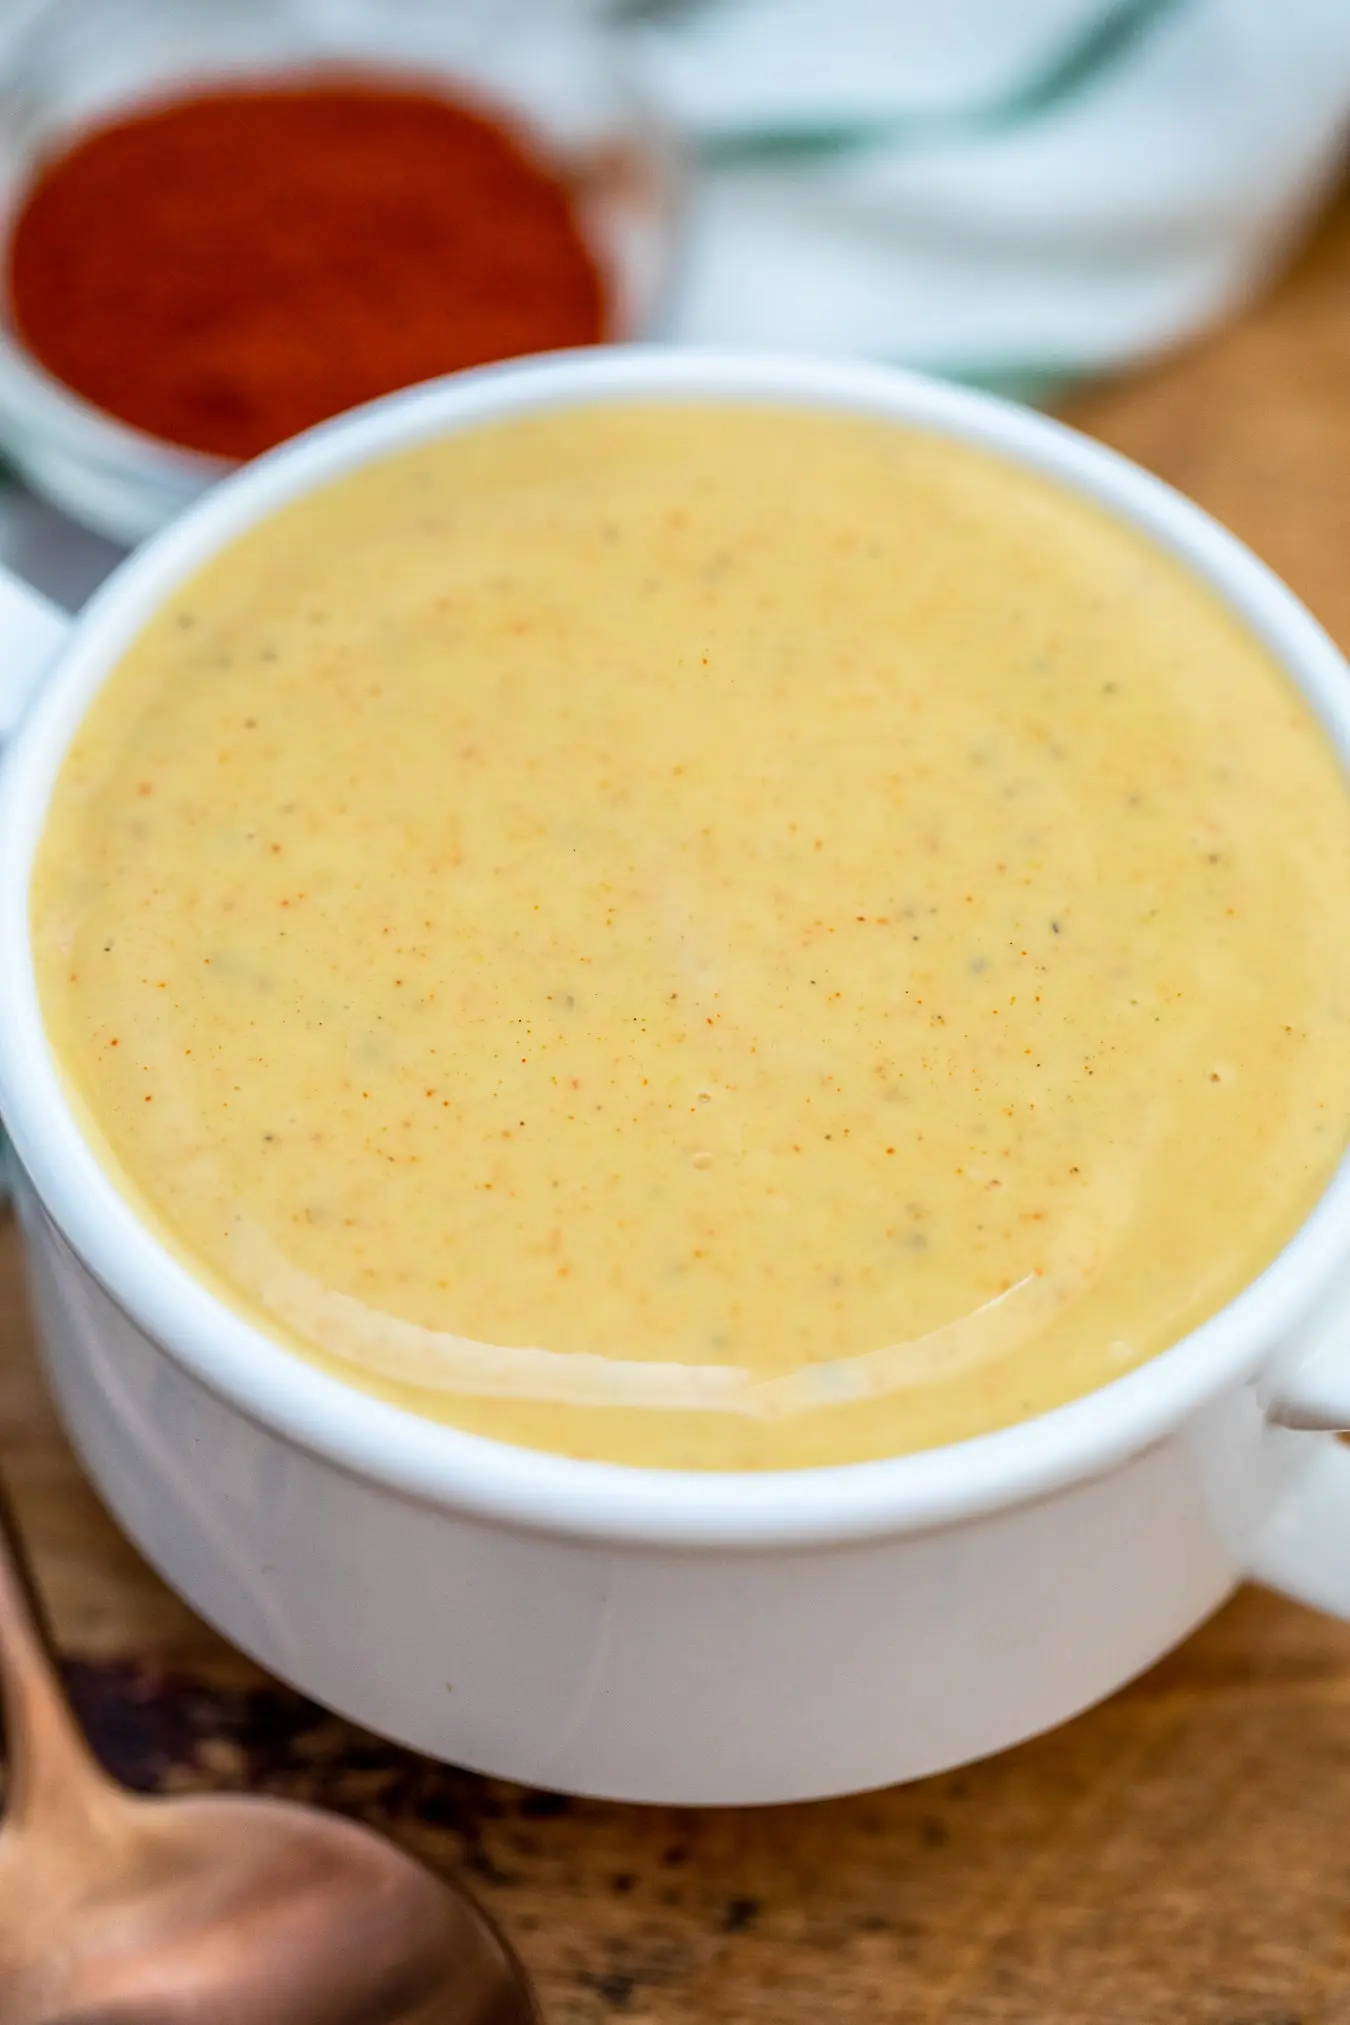 Honey Mustard Sauce. The Best Dip Recipe [Video] - Sweet and Savory Meals